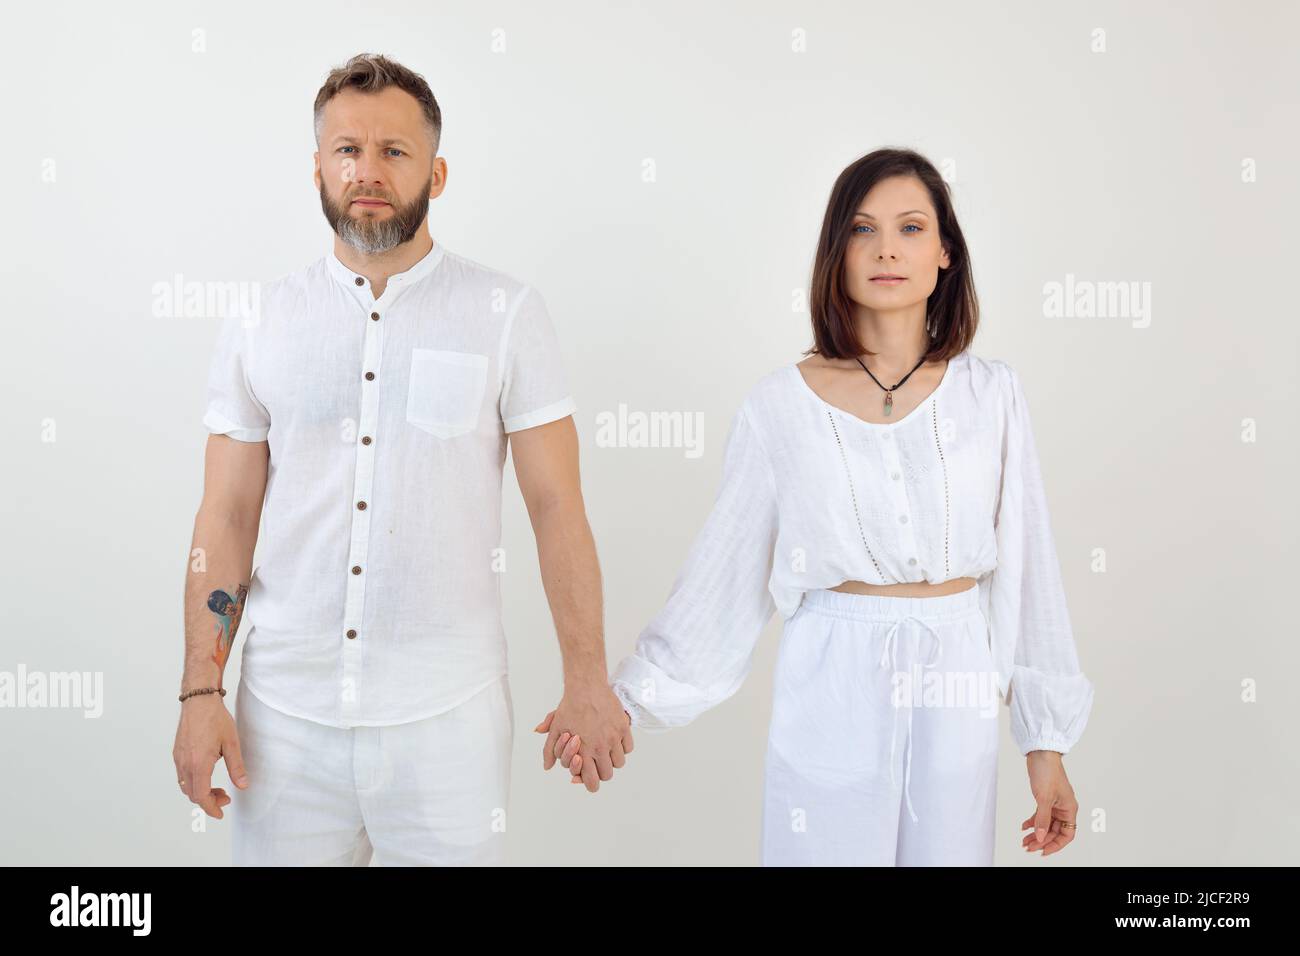 Bearded man and woman, family wearing white fashion clothes, holding hands together. Family business, trust relationship Stock Photo